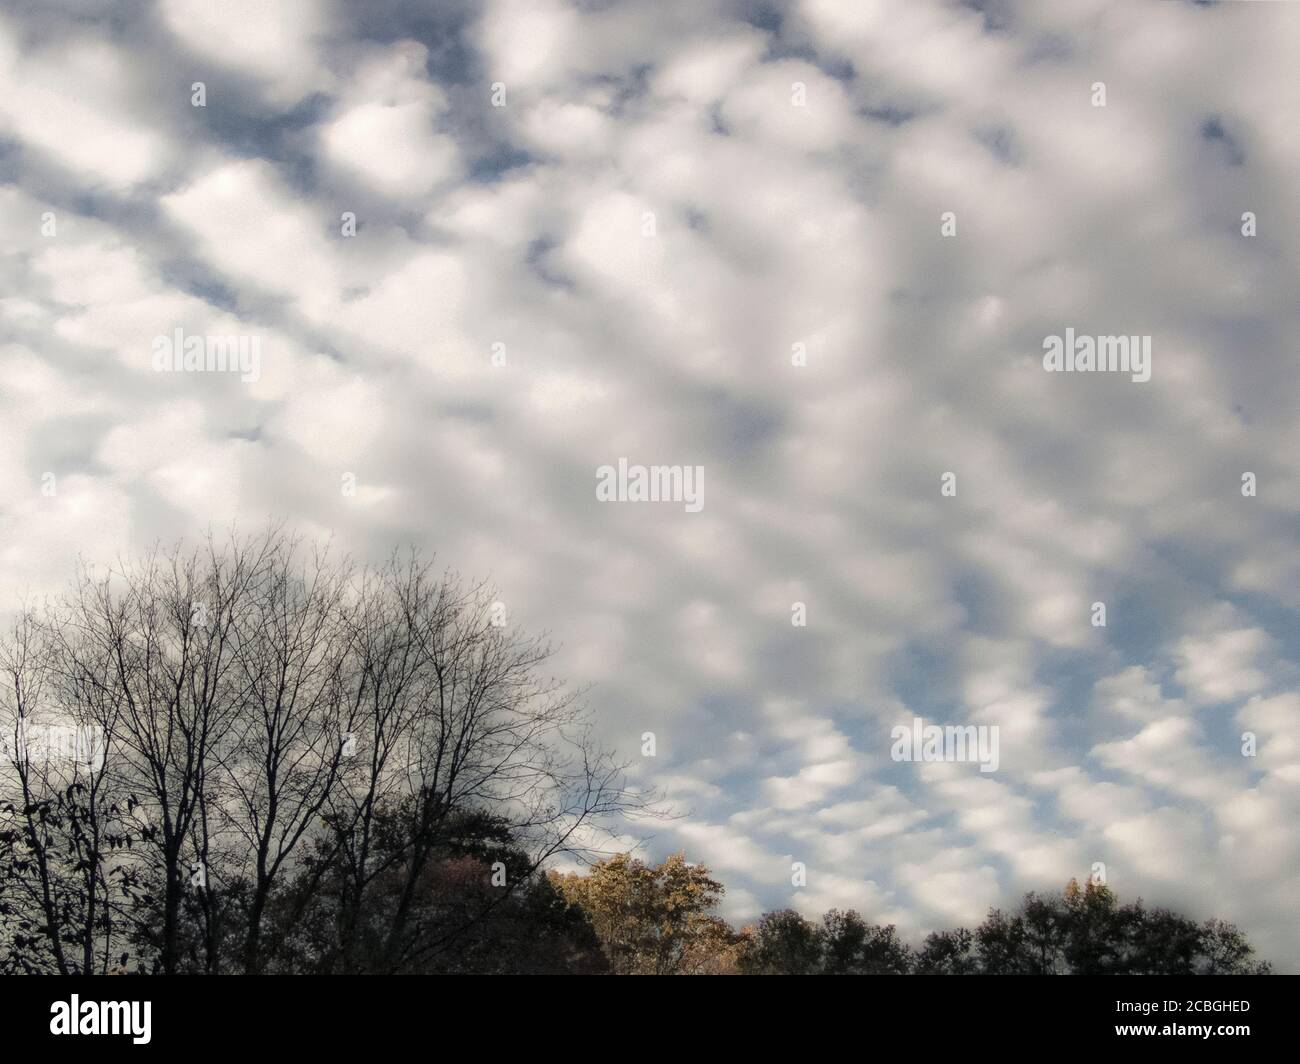 Patterned Clouds Stock Photo